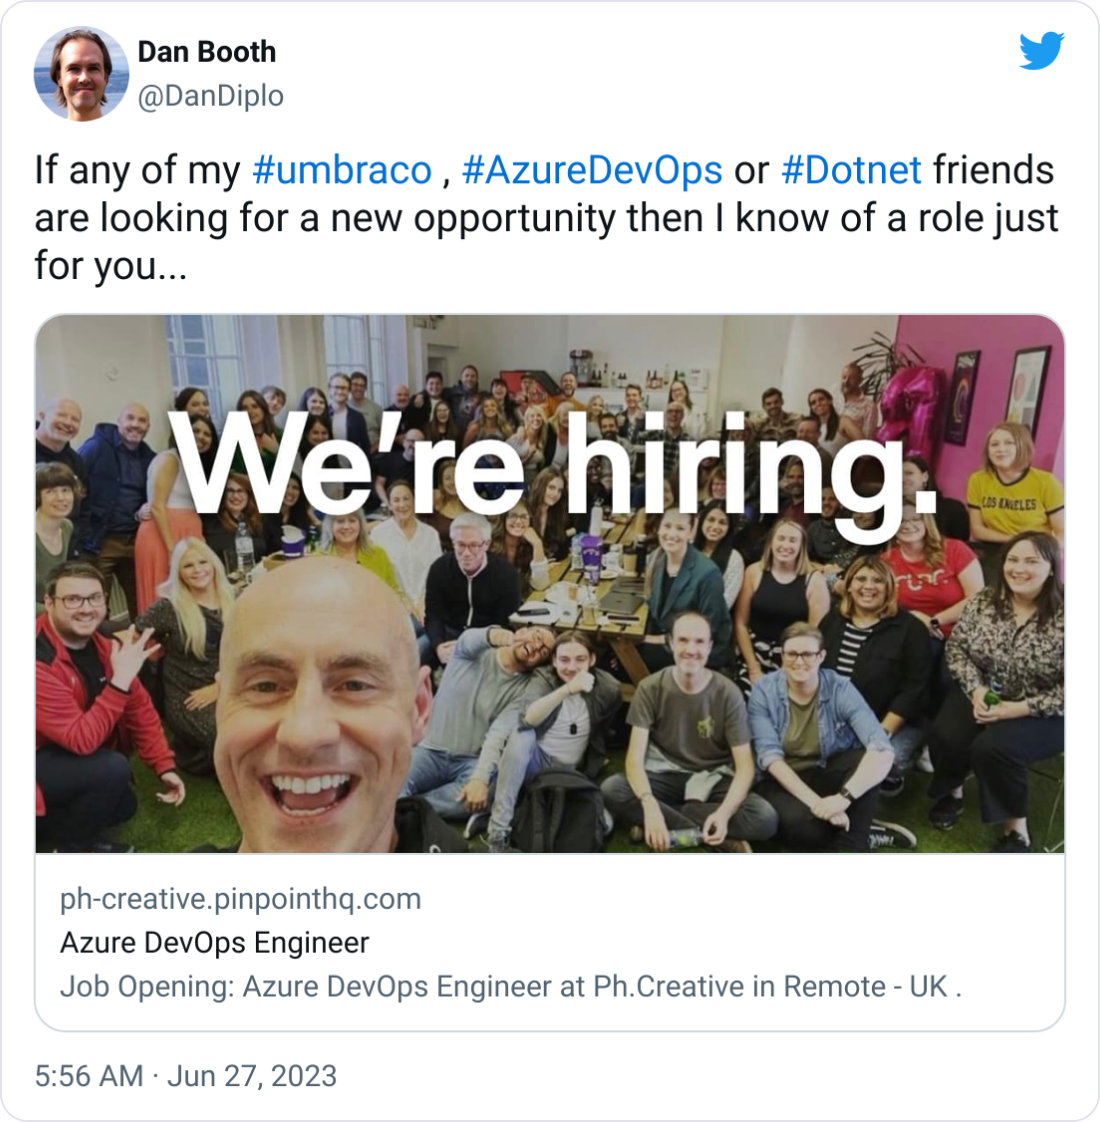 Dan Booth @DanDiplo If any of my #umbraco , #AzureDevOps or #Dotnet friends are looking for a new opportunity then I know of a role just for you...